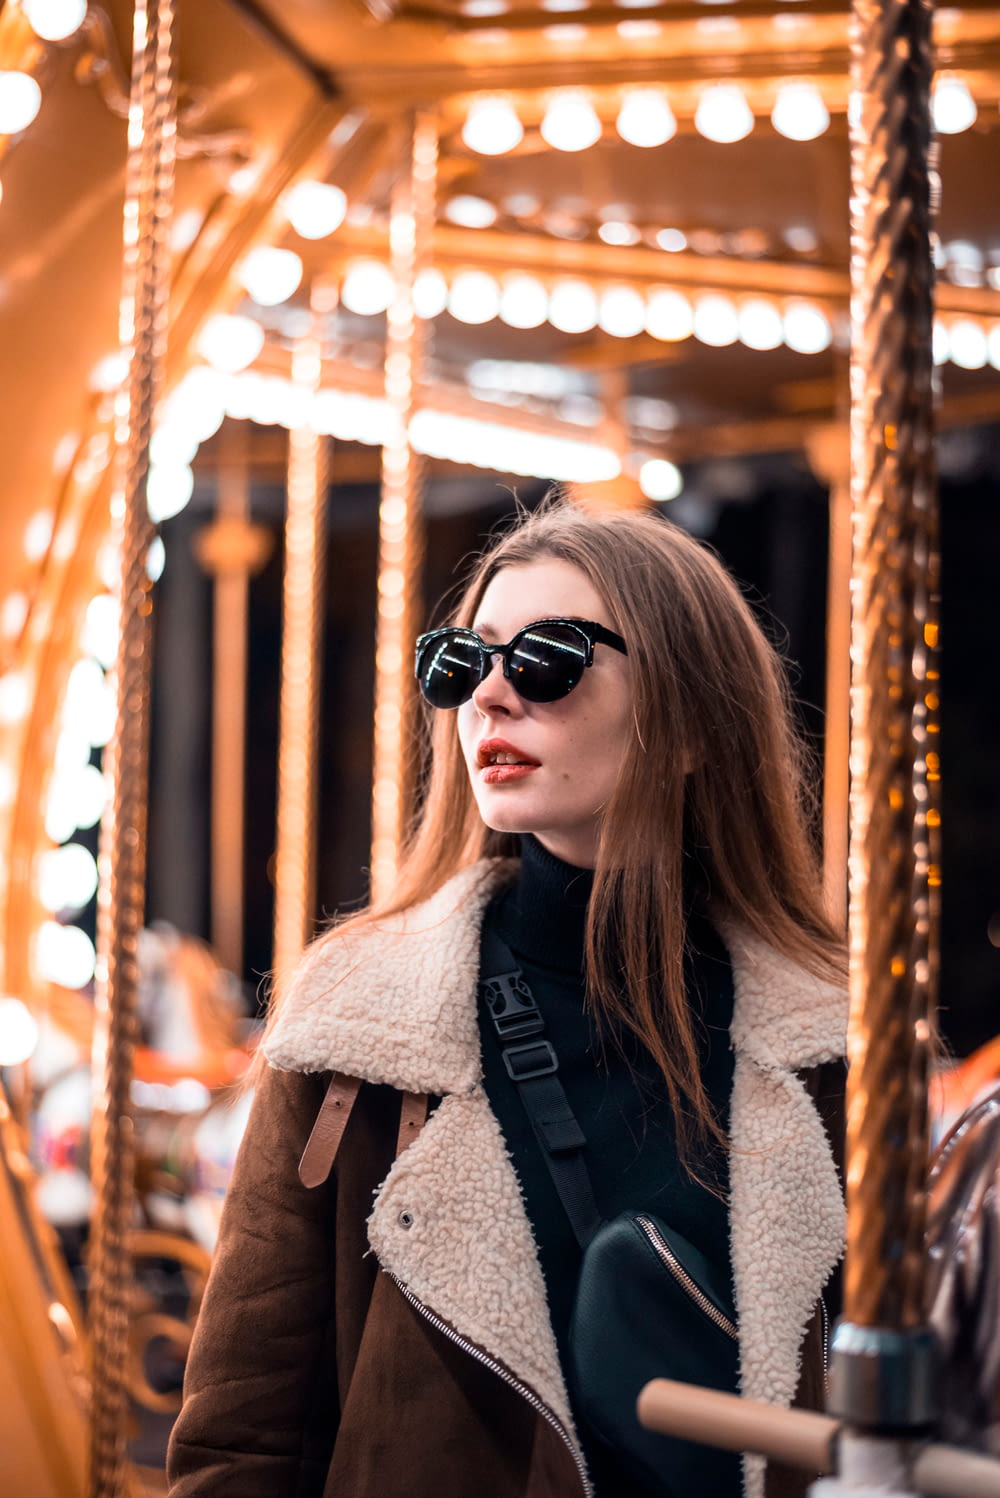 a woman wearing sunglasses standing in front of a merry go round